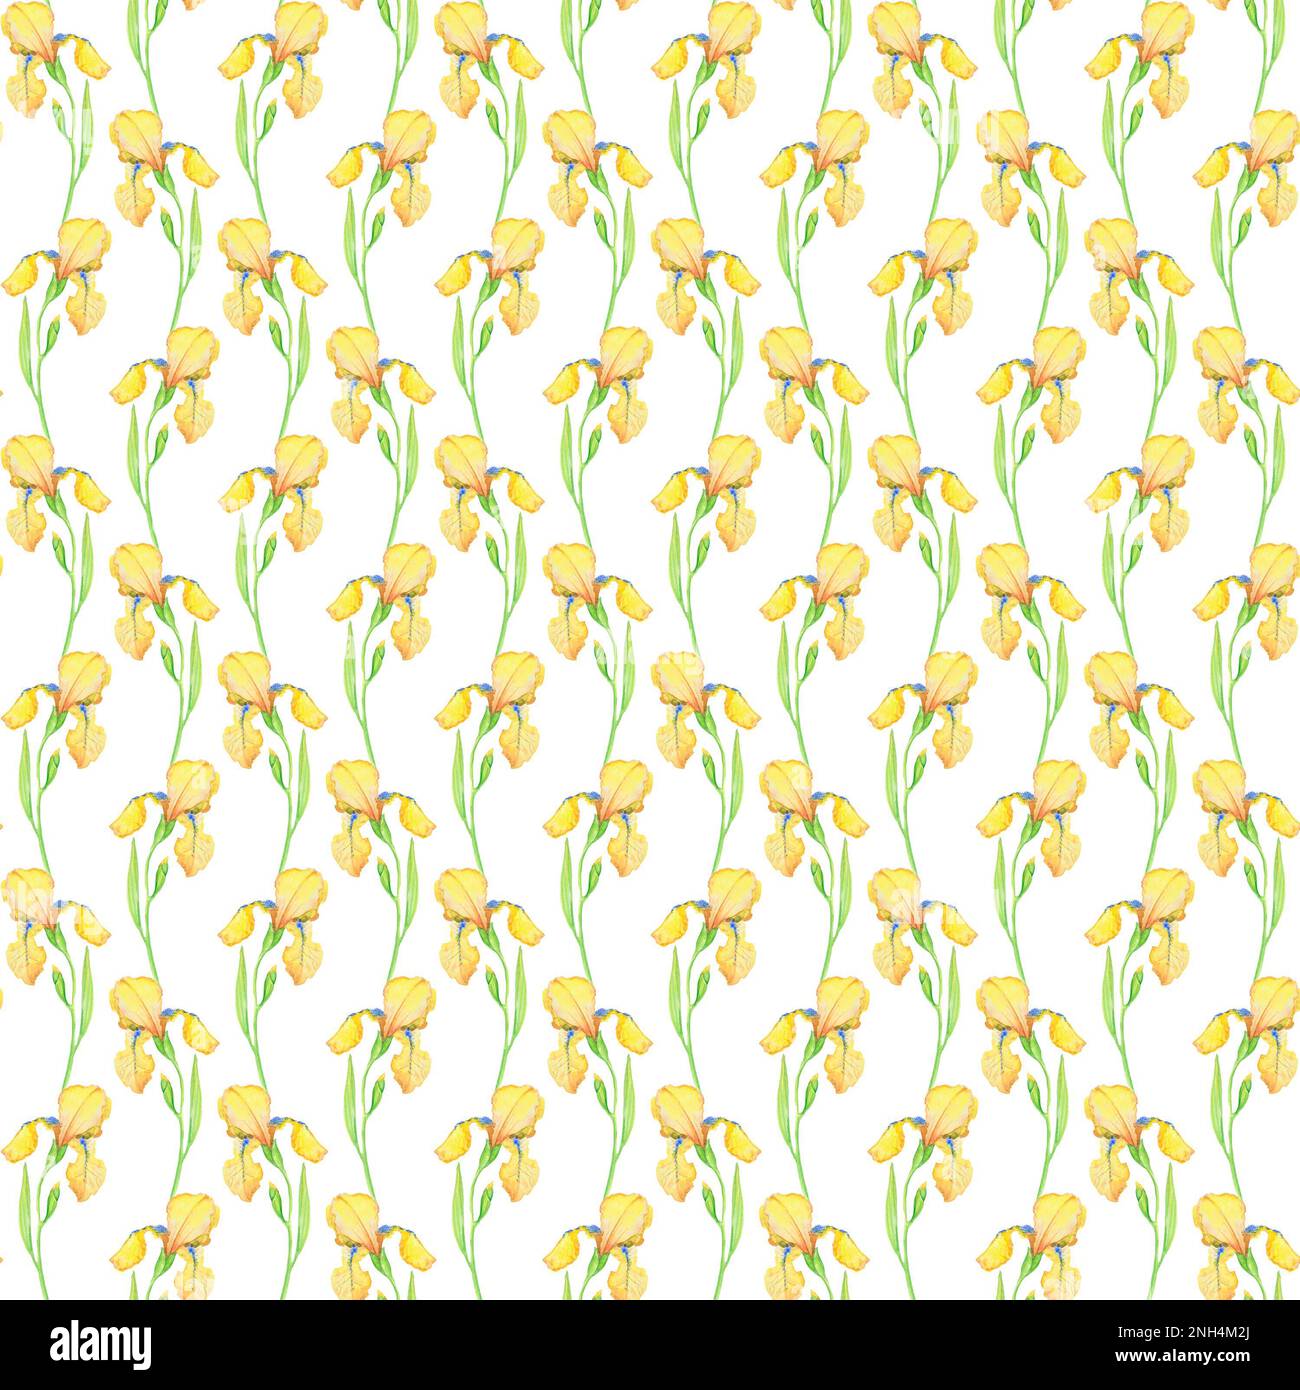 Yellow irises seamless pattern, watercolor illustration of flowers. Hand drawing for printing on fabric, decoration, wallpaper, wrapping paper Stock Photo